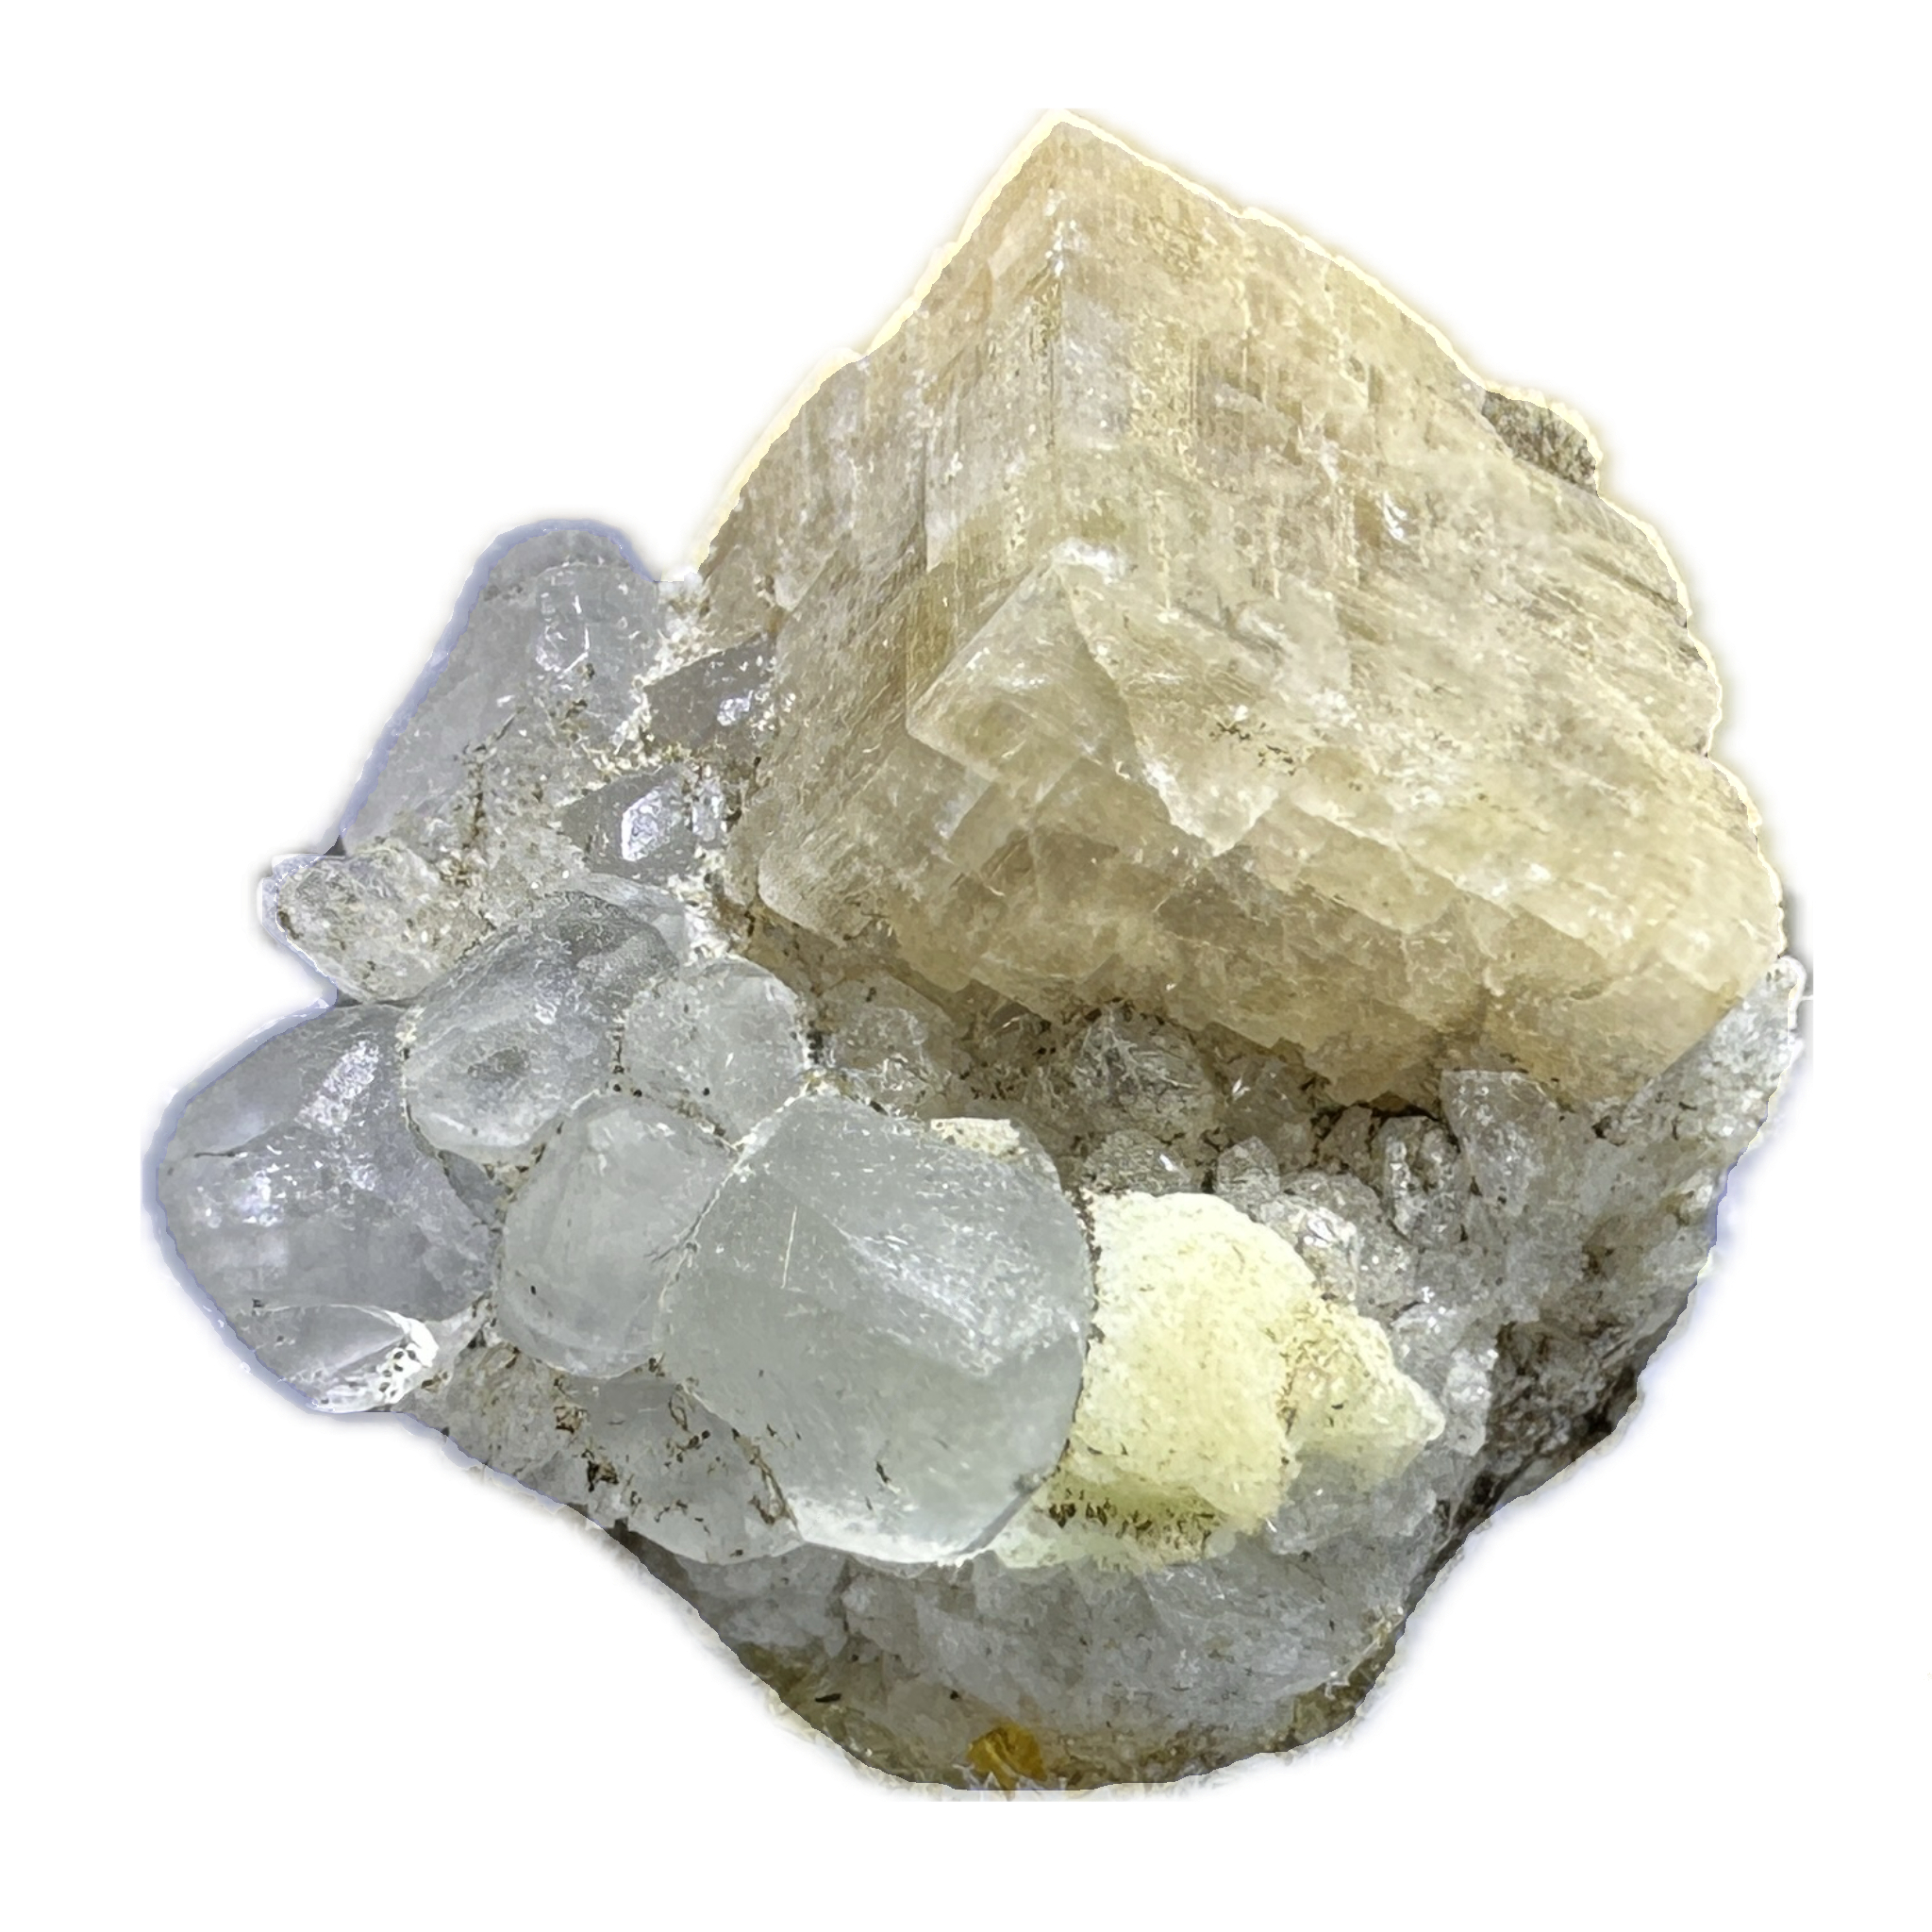 Chabazite thumbnail mineral, New Jersey Prehistoric Online